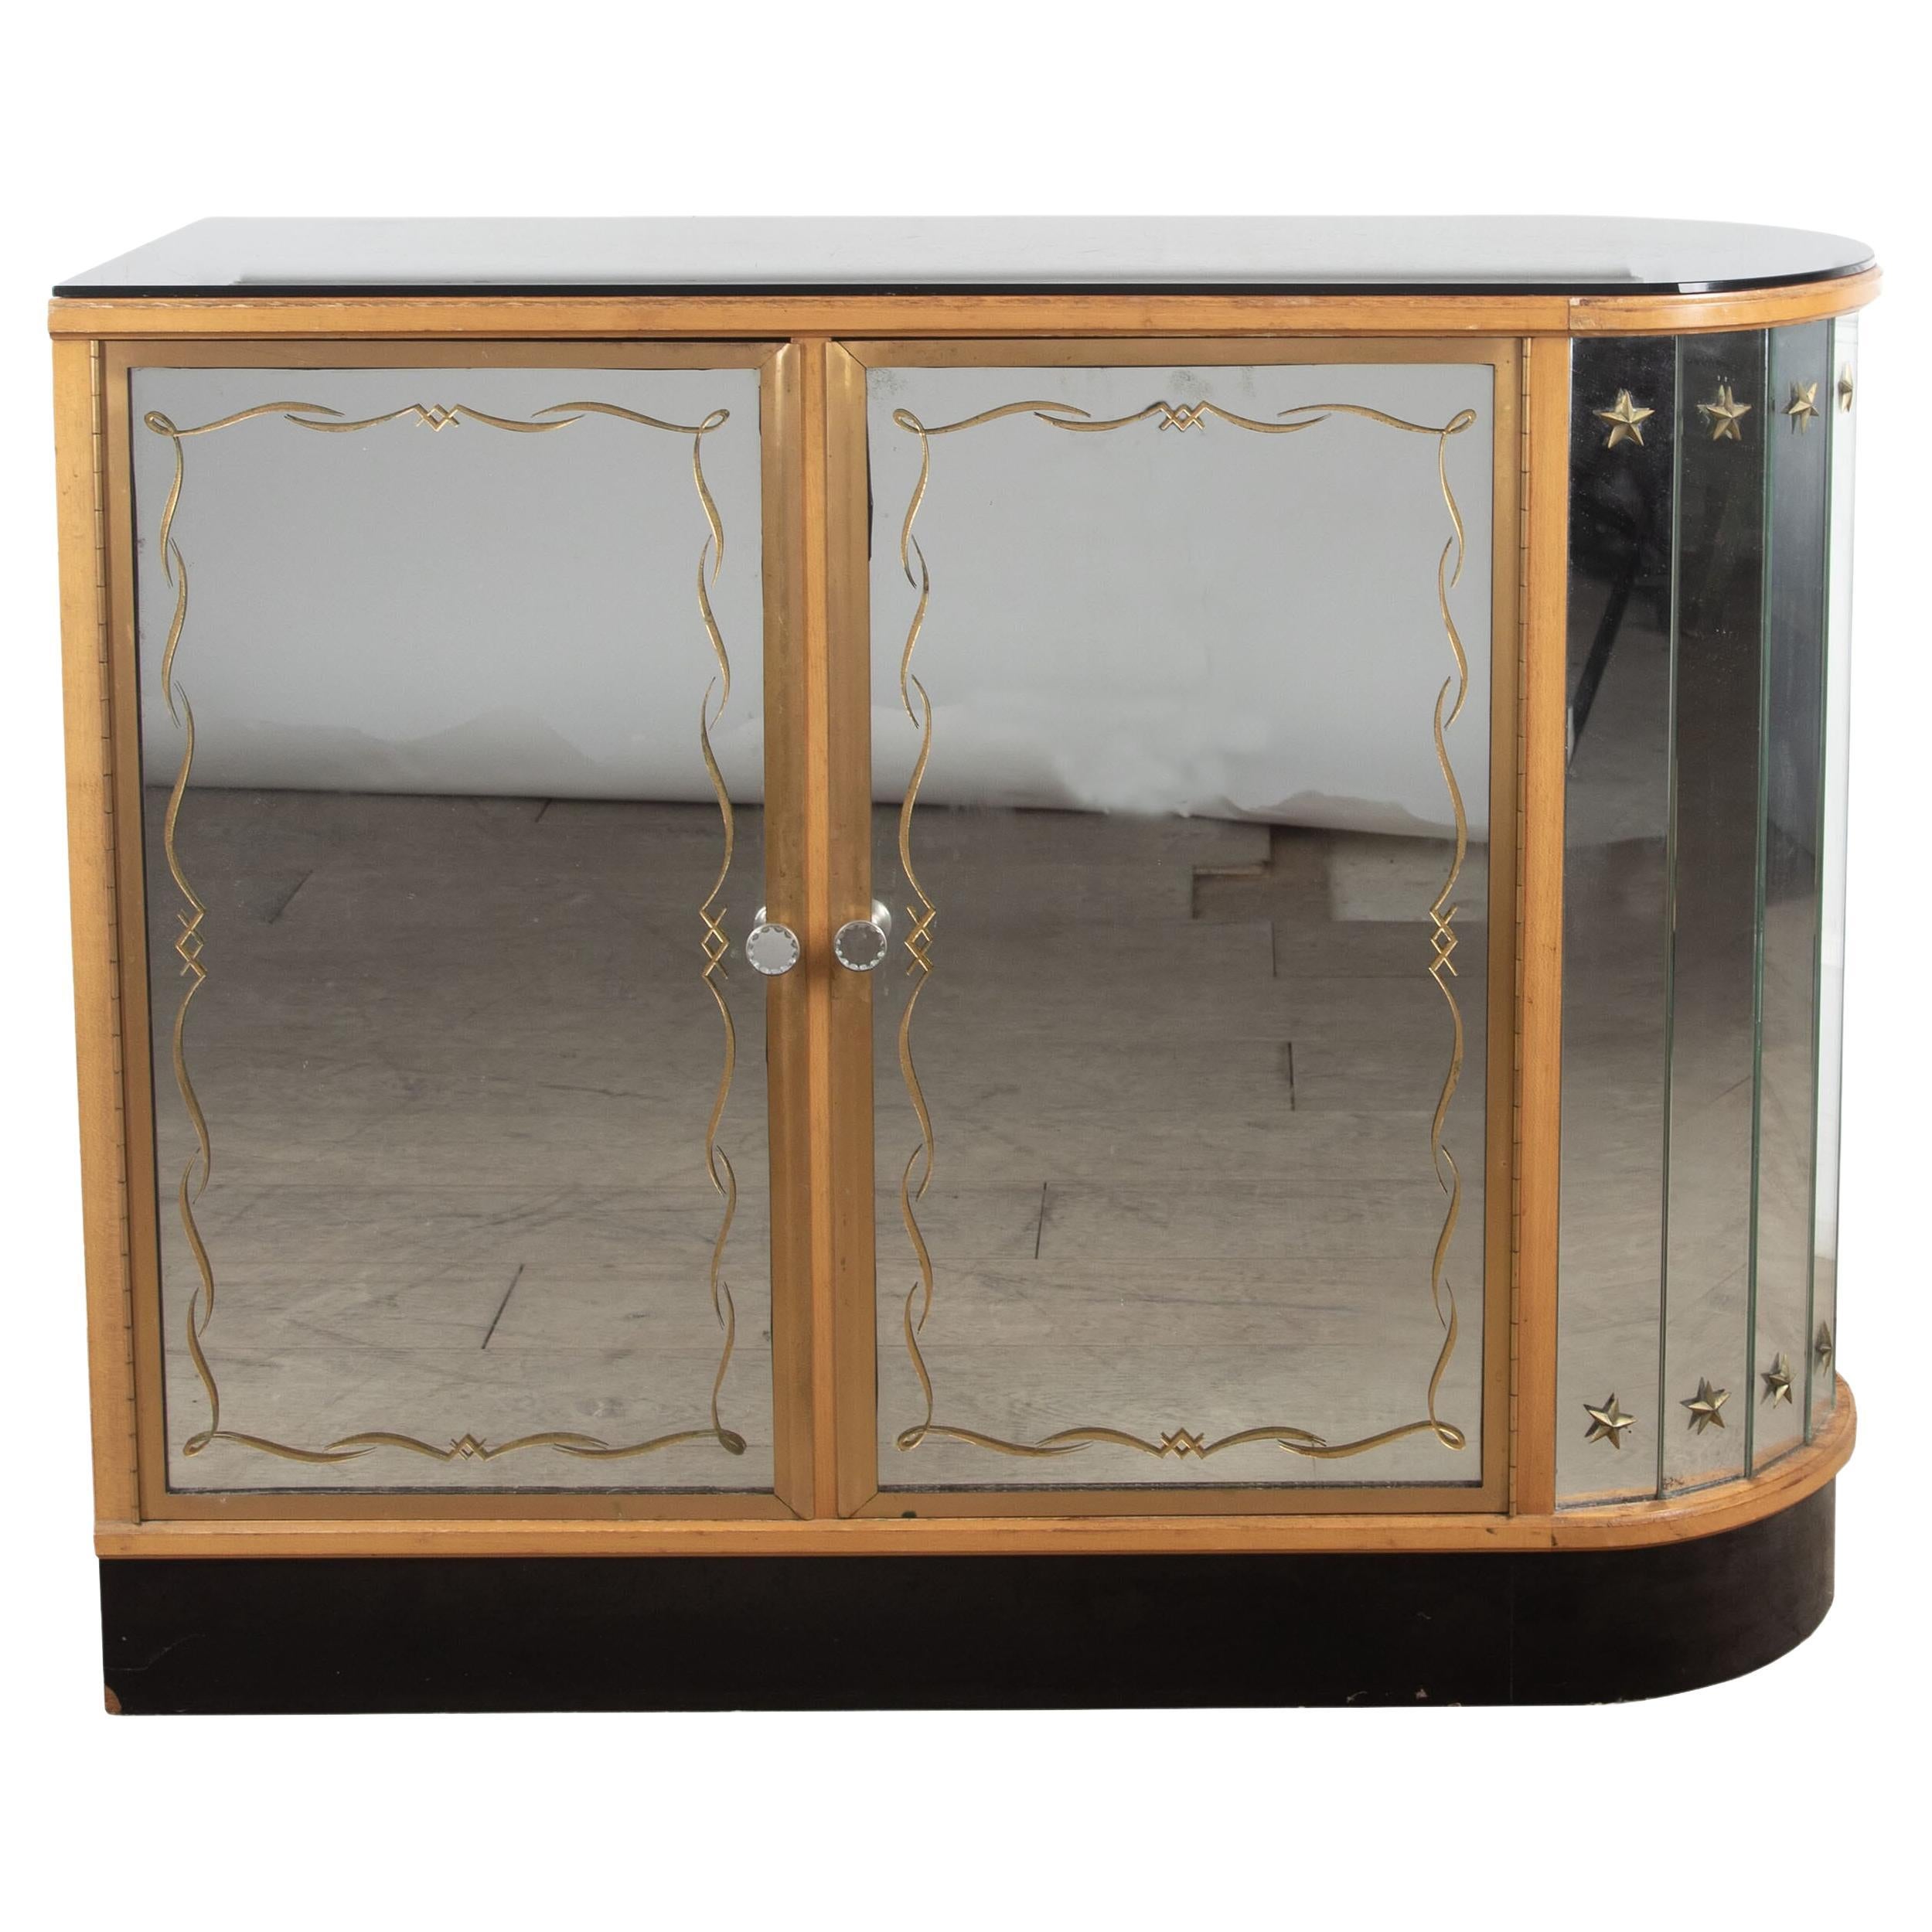 20th Century Glazed Cocktail Cabinet in the Style of Renee Drouet For Sale